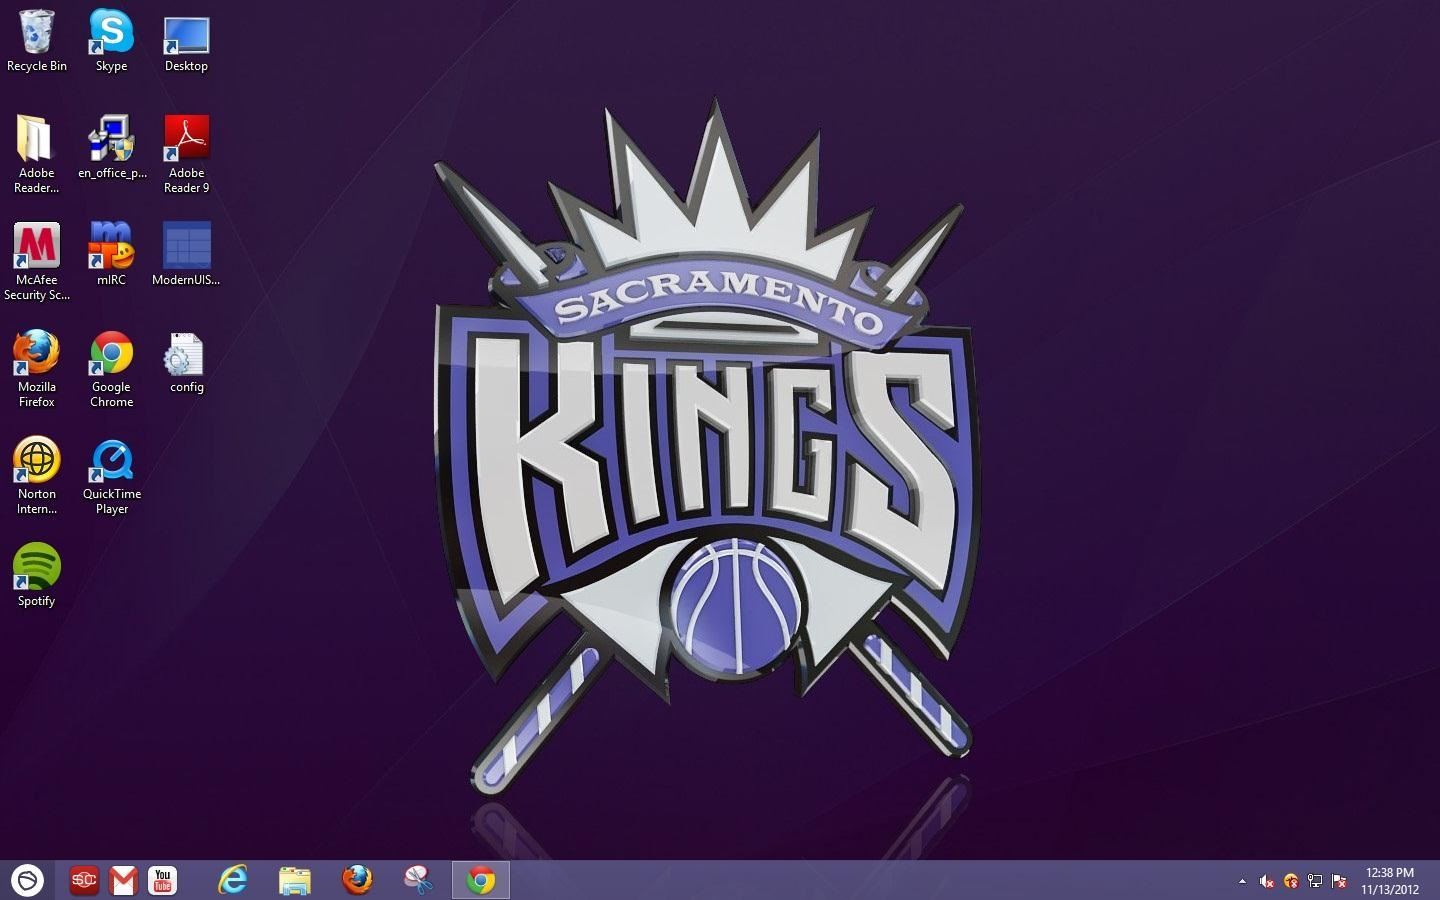 How To Add A Custom Background Image To Your Windows - La Lakers Vs Kings - HD Wallpaper 